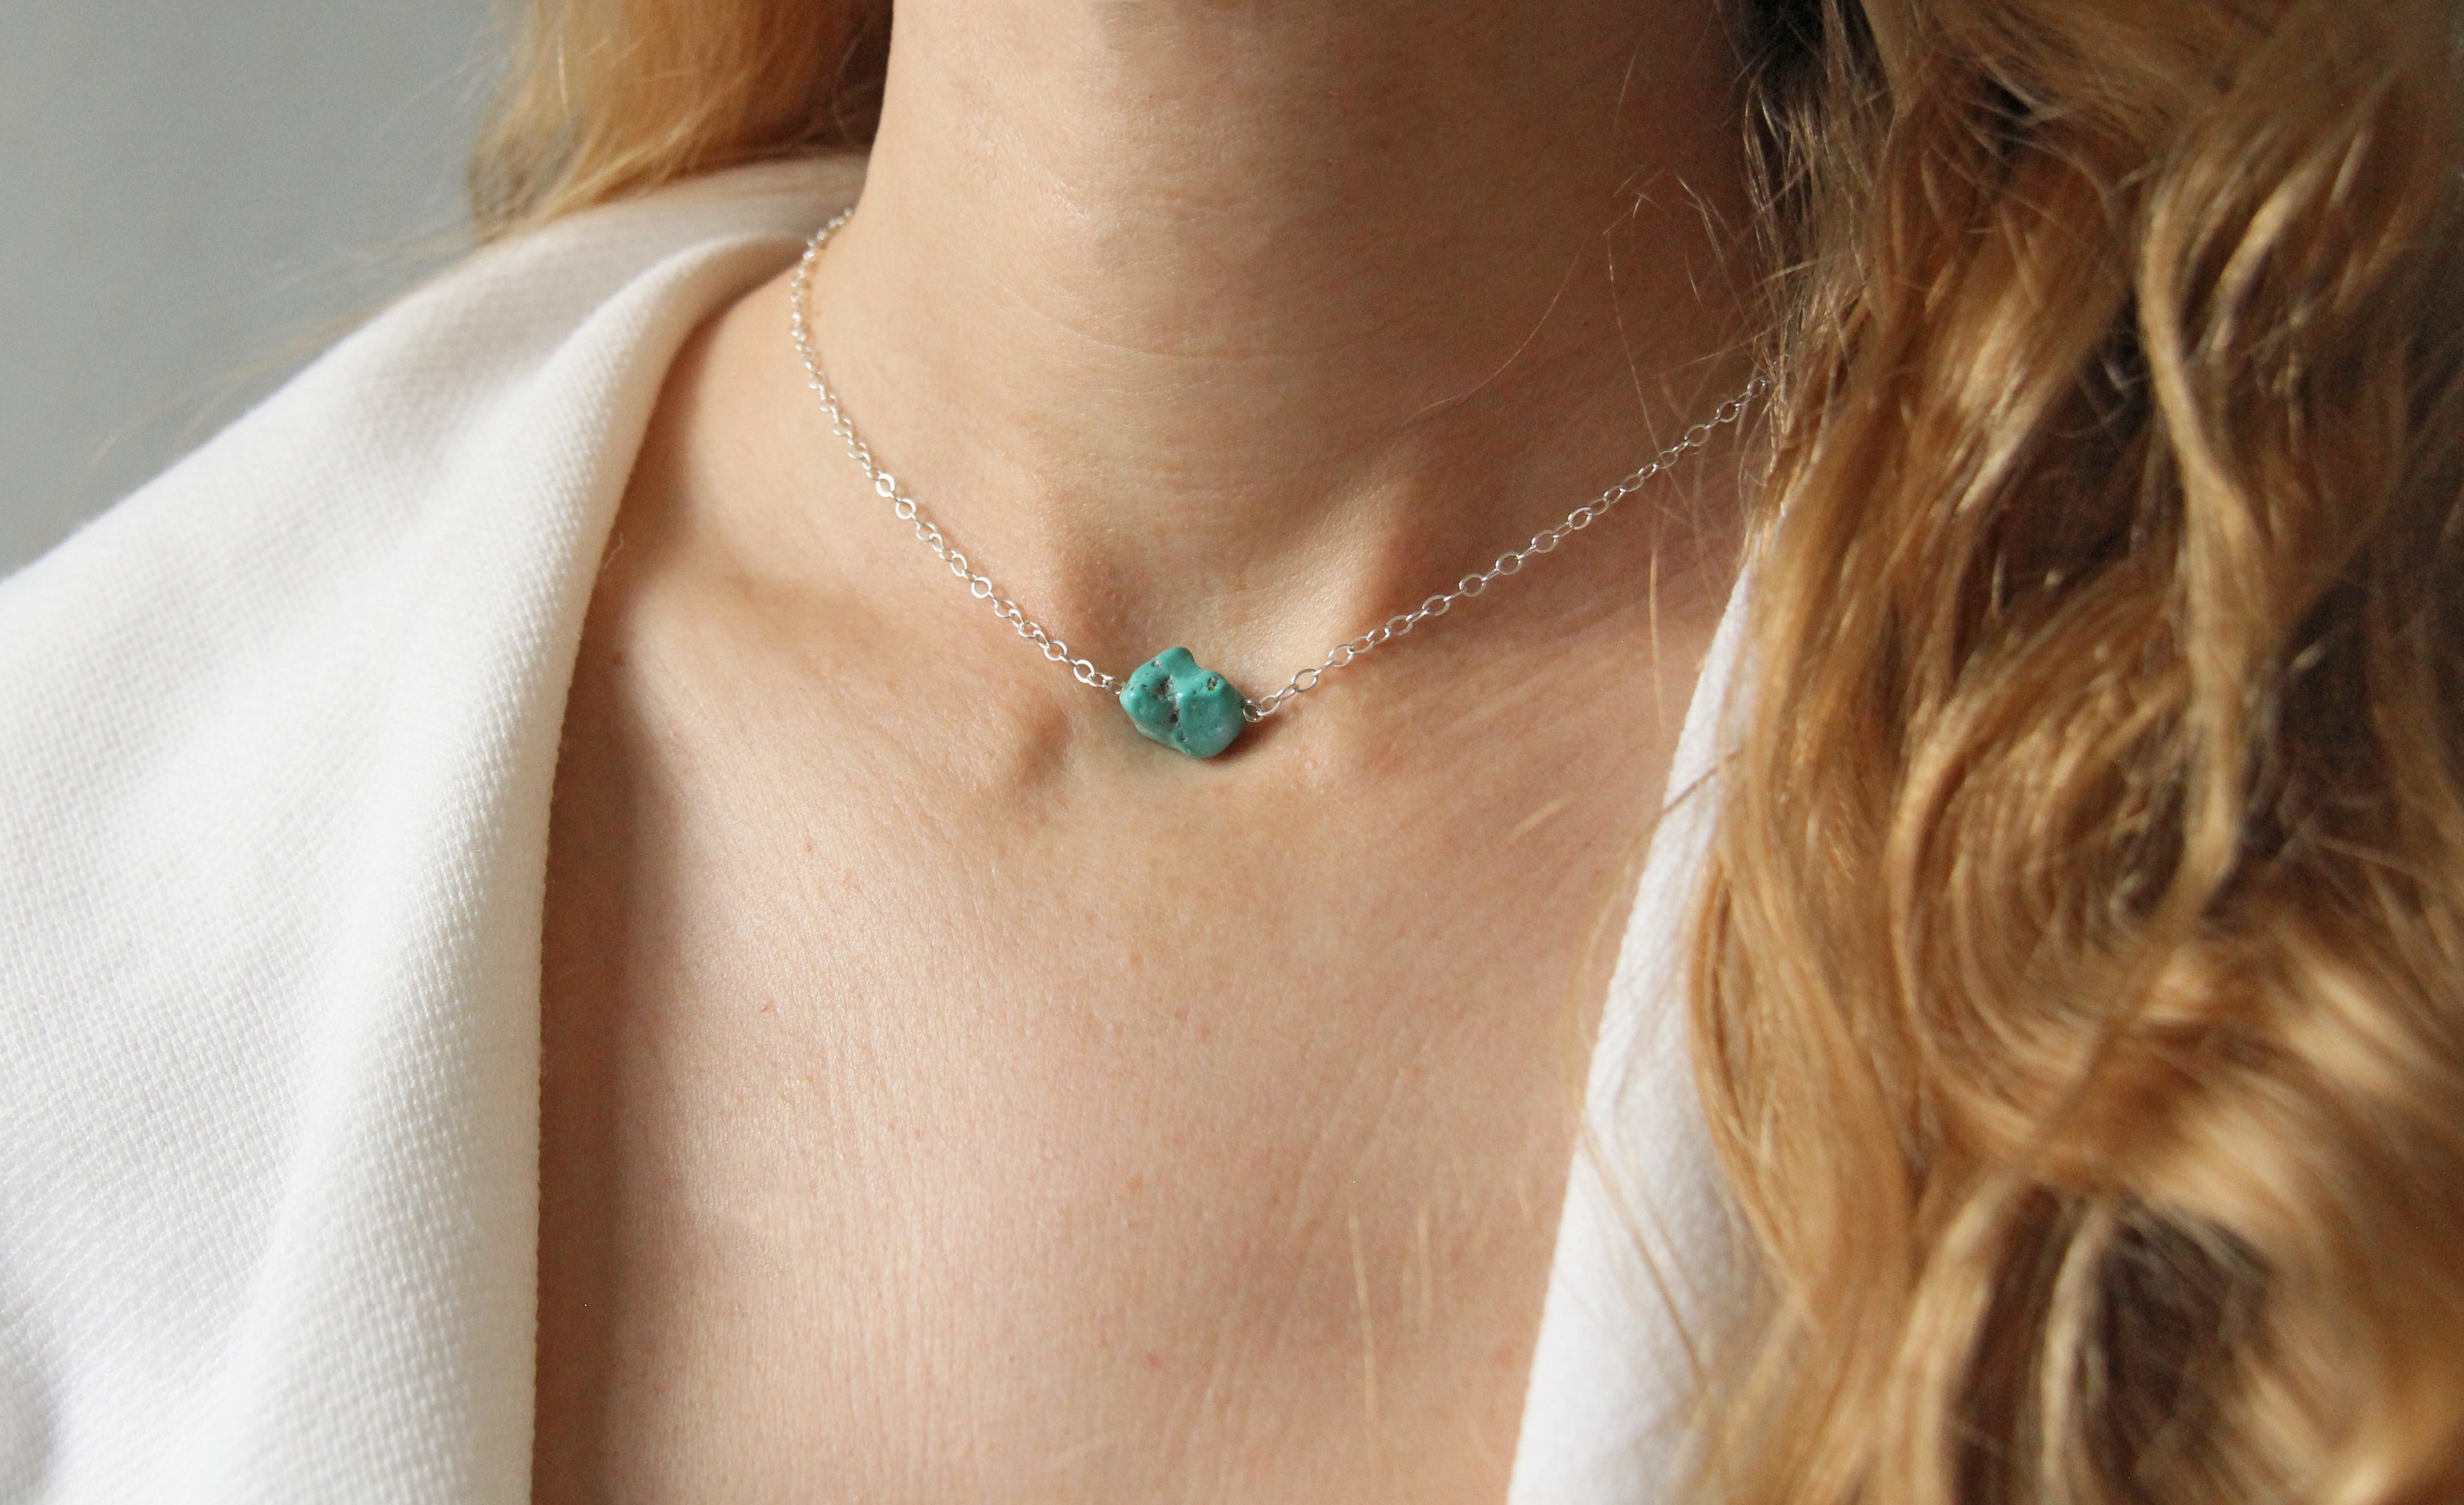 A raw crystal necklace with healing properties makes a beautiful birthday gift.